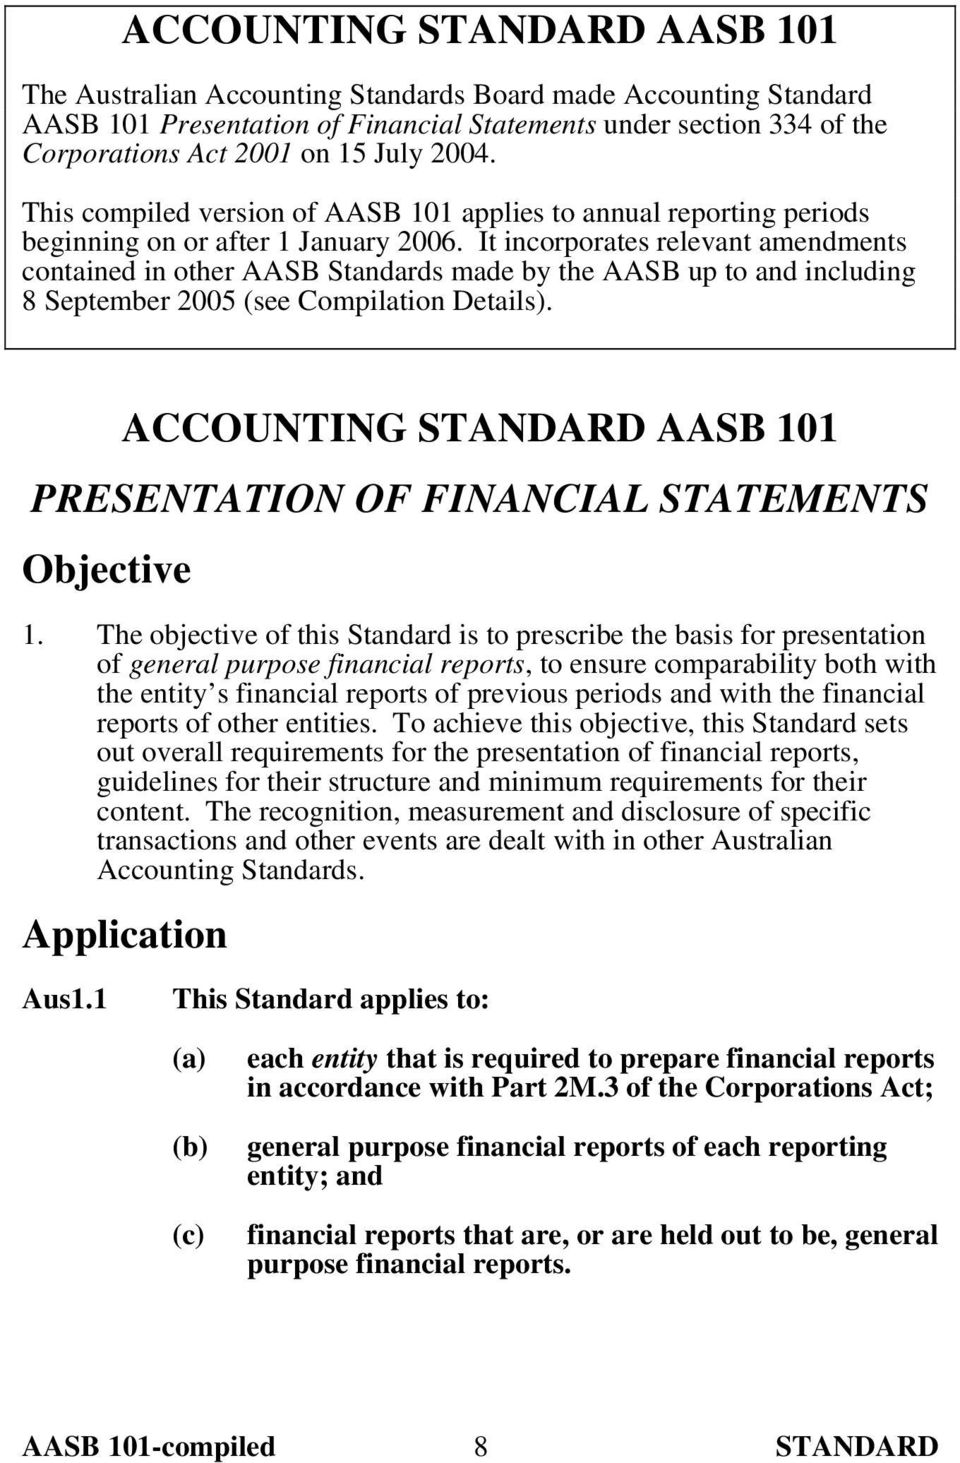 It incorporates relevant amendments contained in other AASB Standards made by the AASB up to and including 8 September 2005 (see Compilation Details).